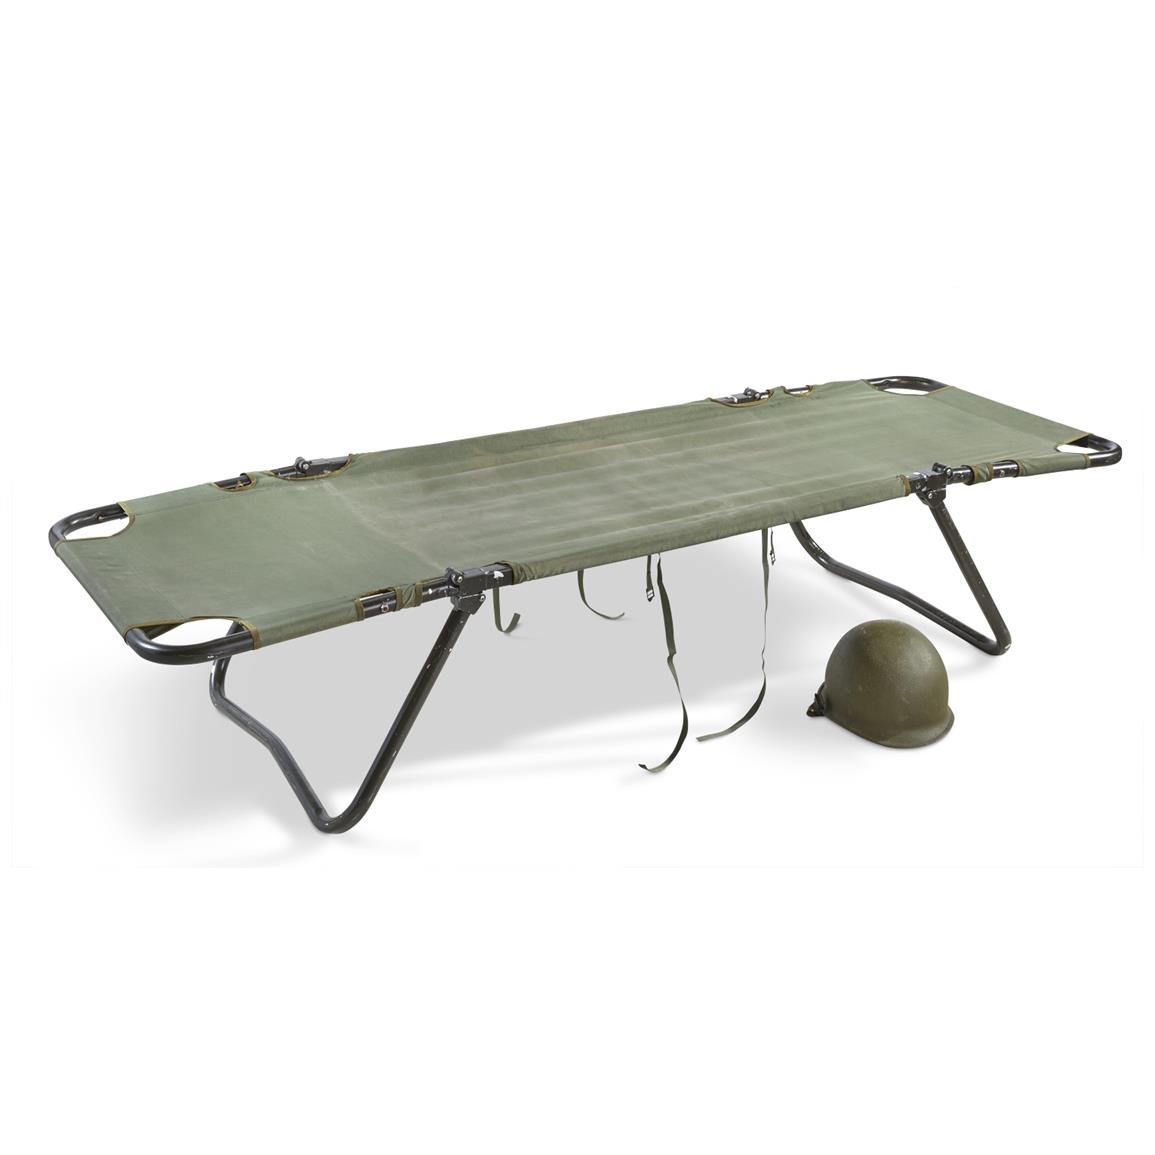 Used Army Cots For Sale - Army Military